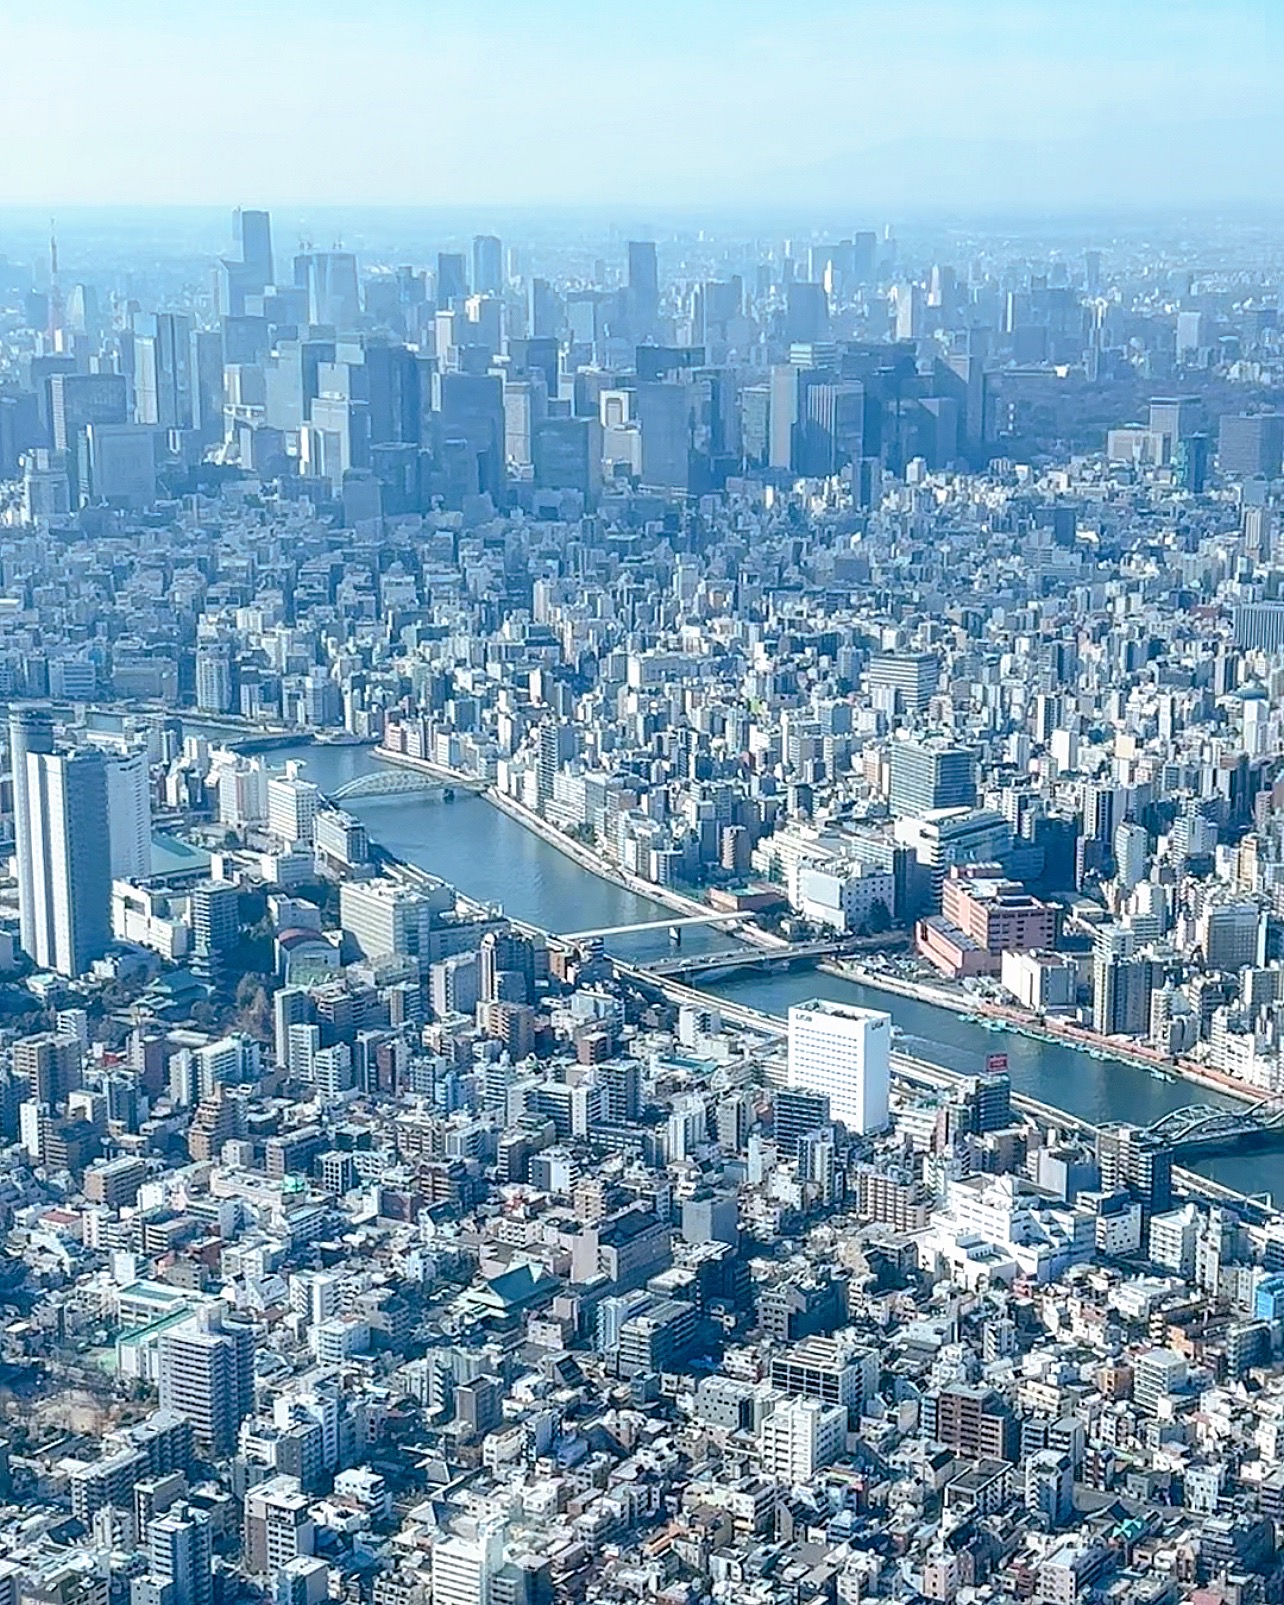 Can Tokyo's charms be replicated elsewhere?